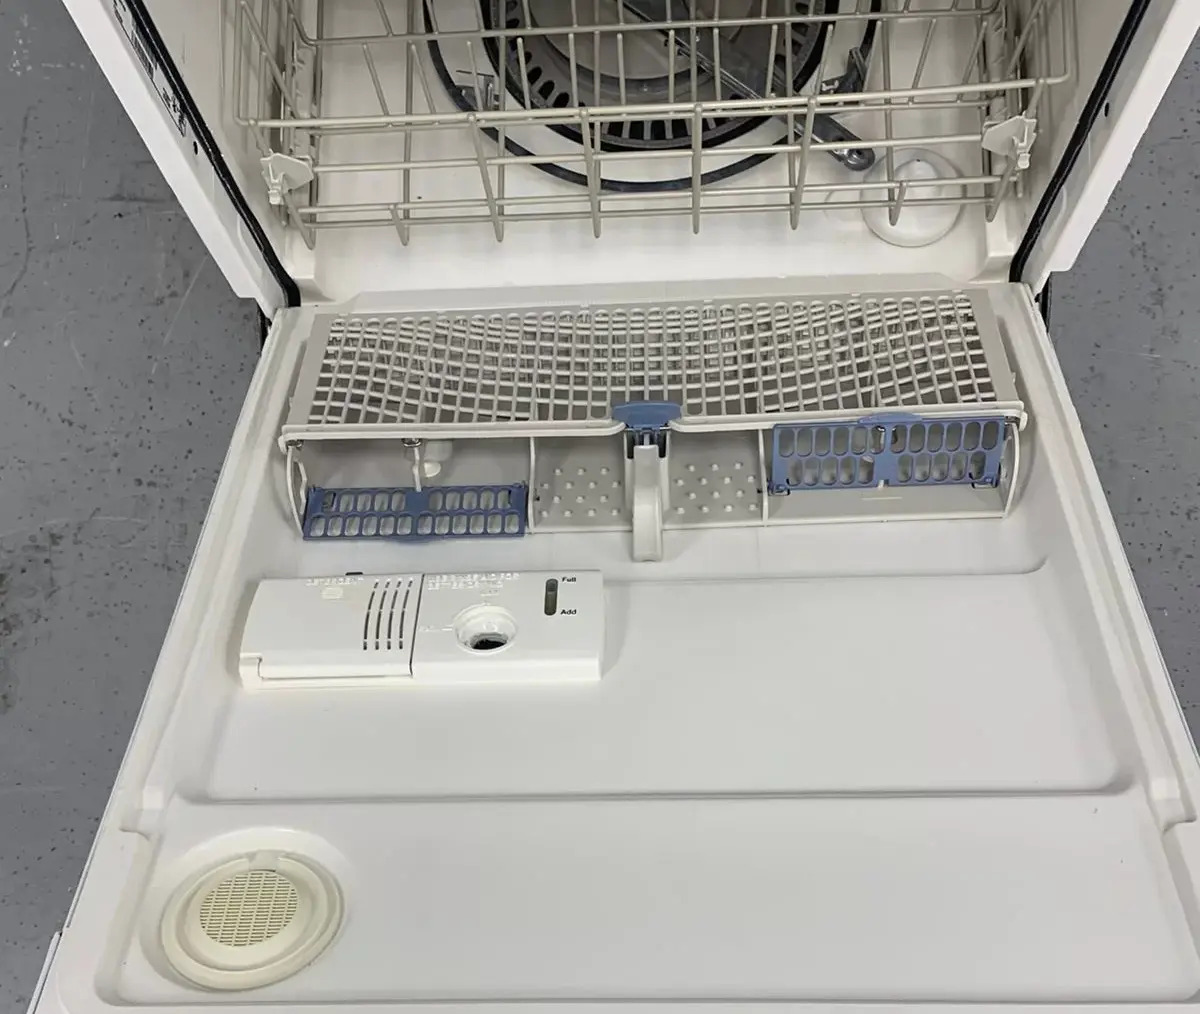 How To Fix The Error Code FA For Whirlpool Dishwasher